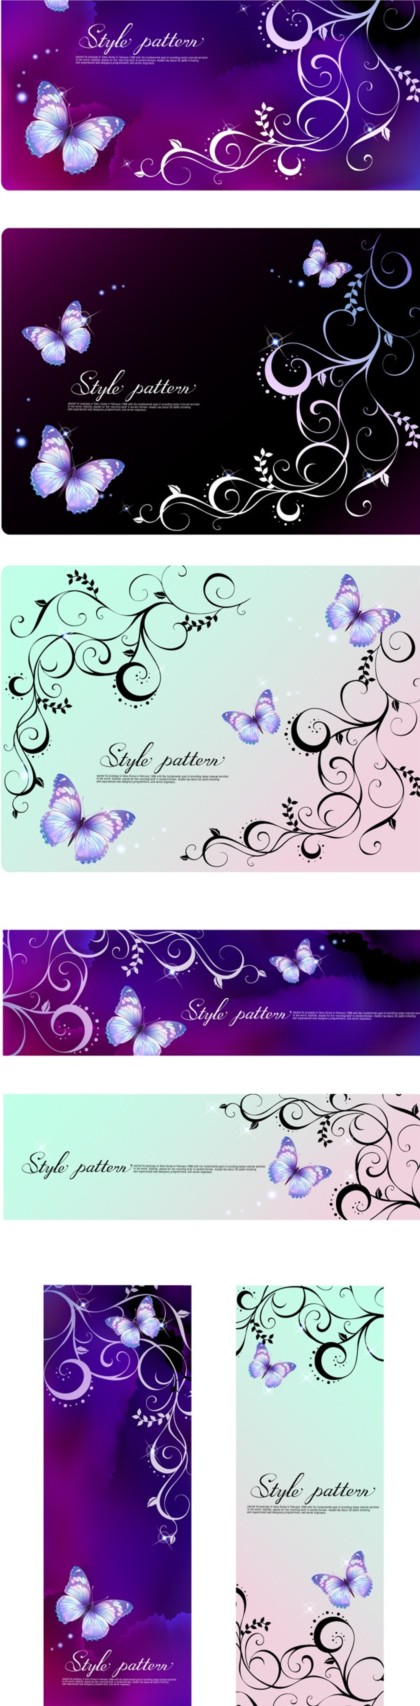 purple butterfly banners with background vector